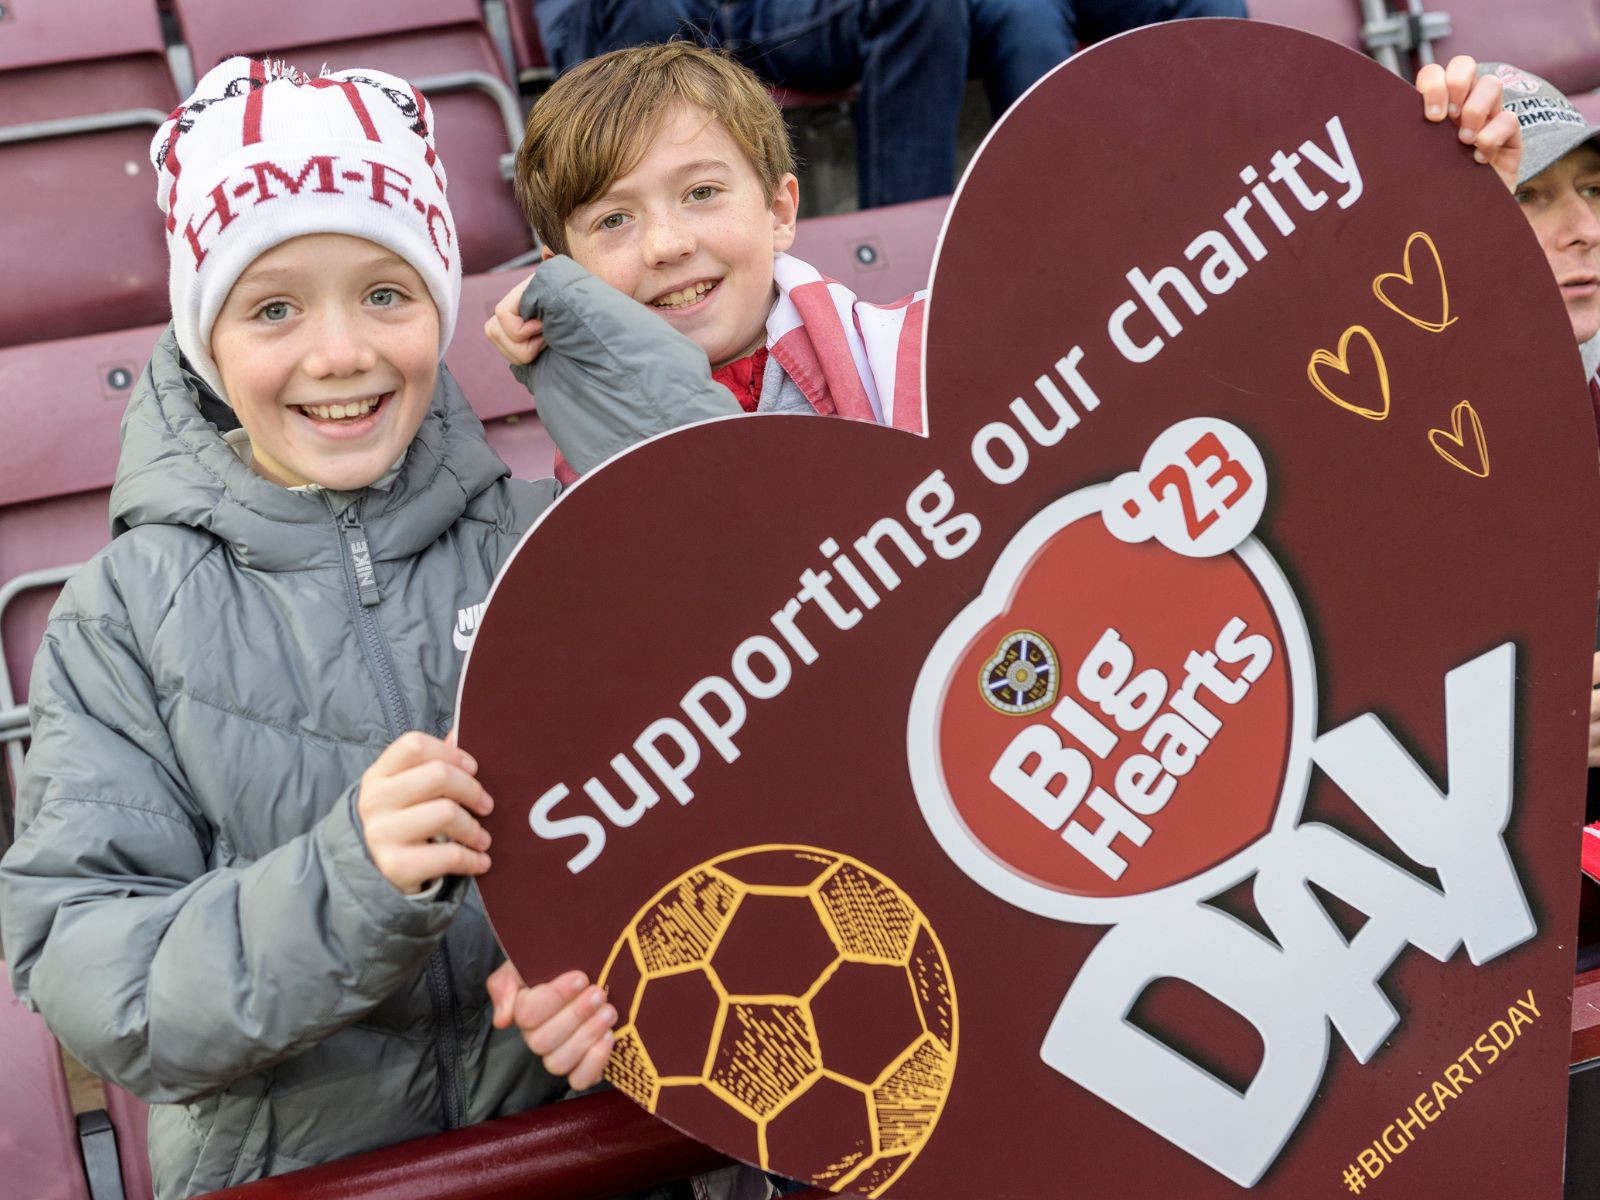  » BIG HEARTS DAY: RECORD AMOUNT RAISED TOWARDS ACHIEVING EQUALITY!